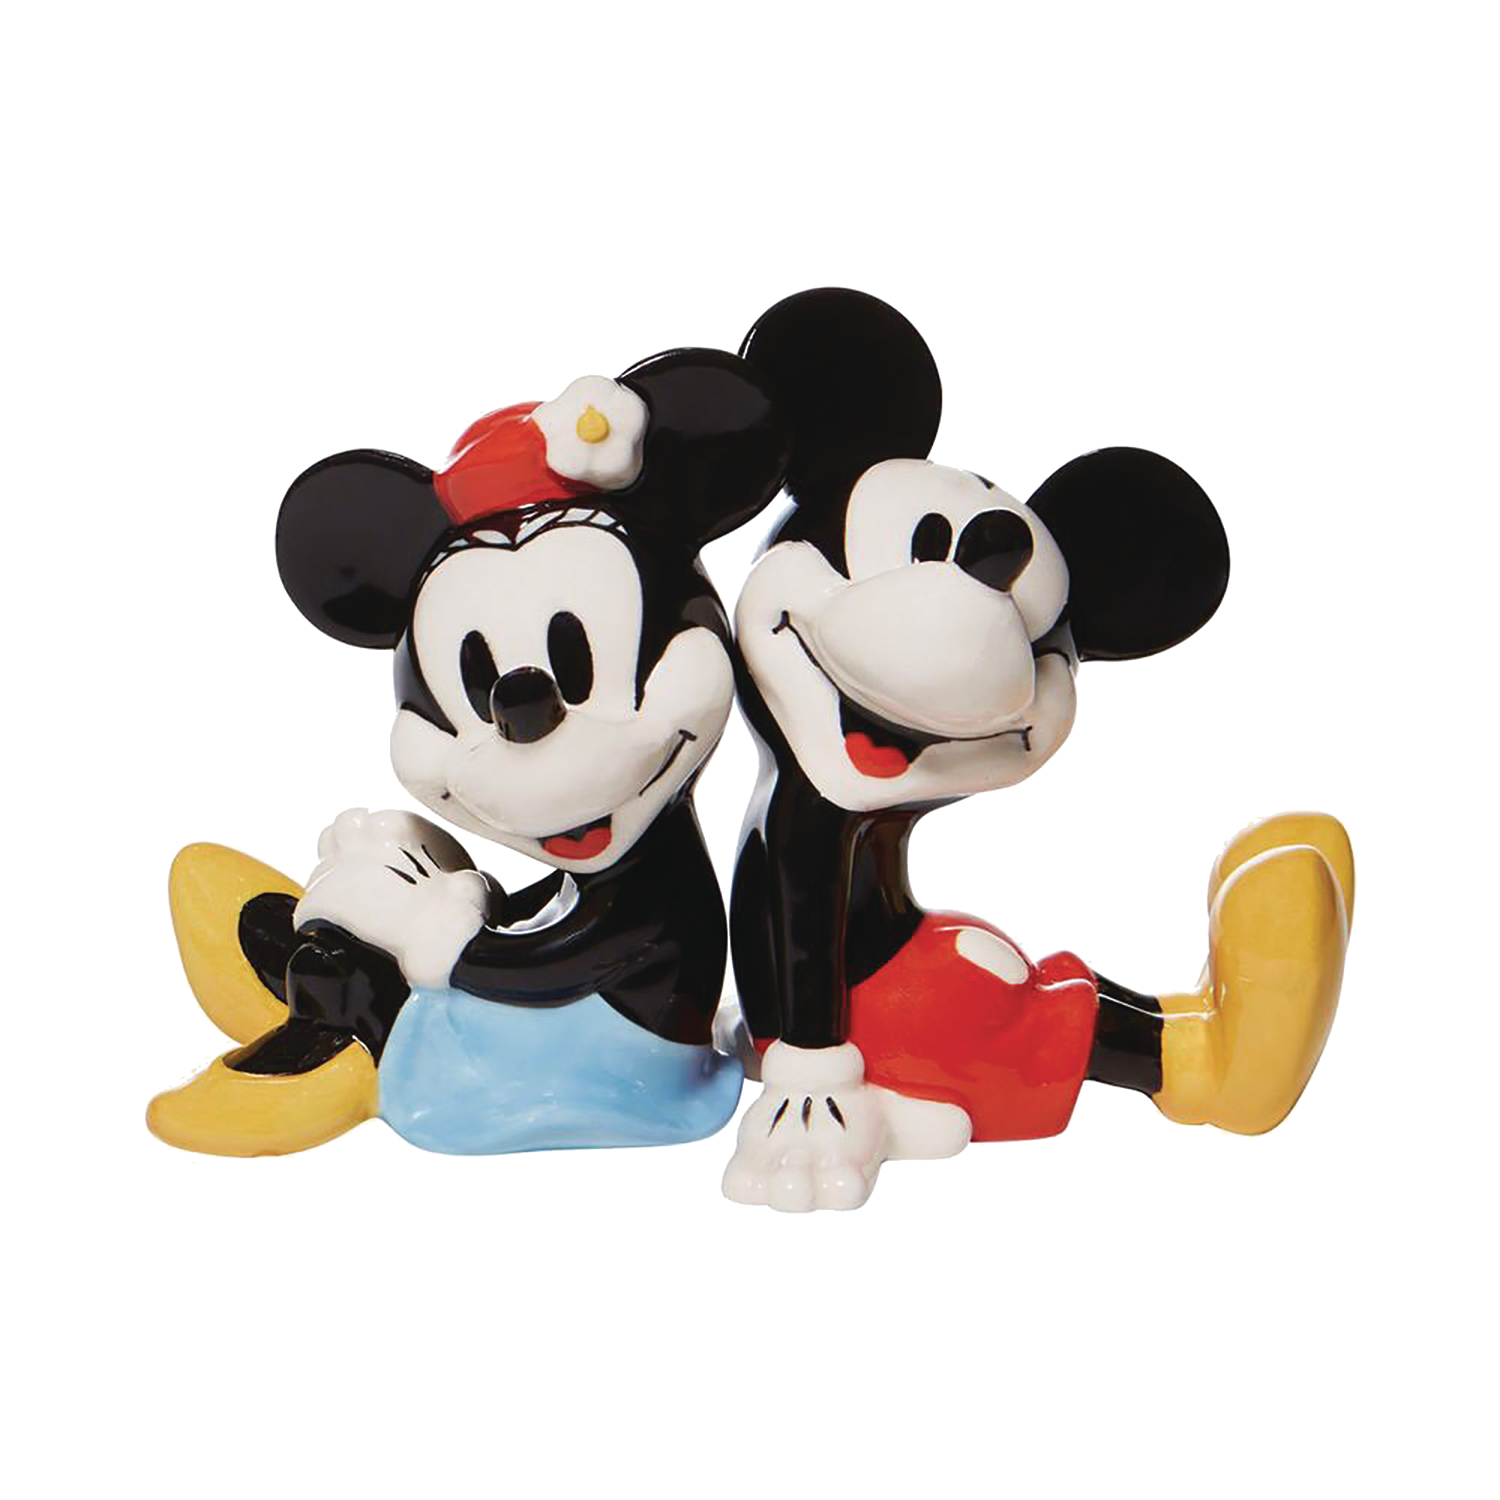 Disney Mickey And Minnie Mouse Salt & Pepper Shaker